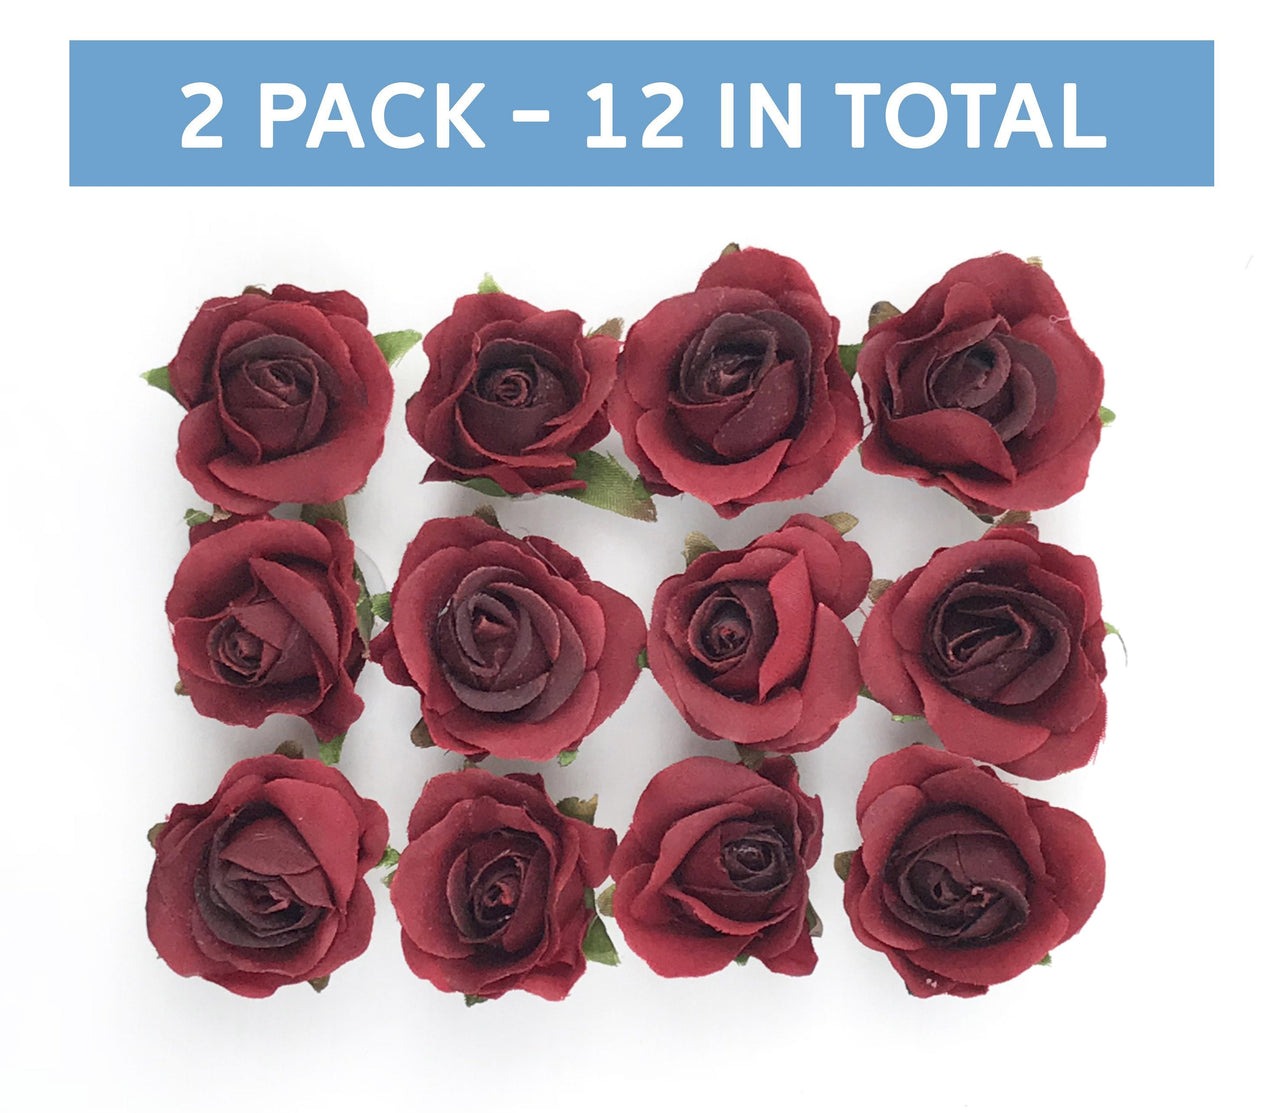 2 Pack - Peel and Stick Flat Back Roses for Grad Cap Decoration - Assorted Colors - Tassel Toppers - Professionally Decorated Grad Caps